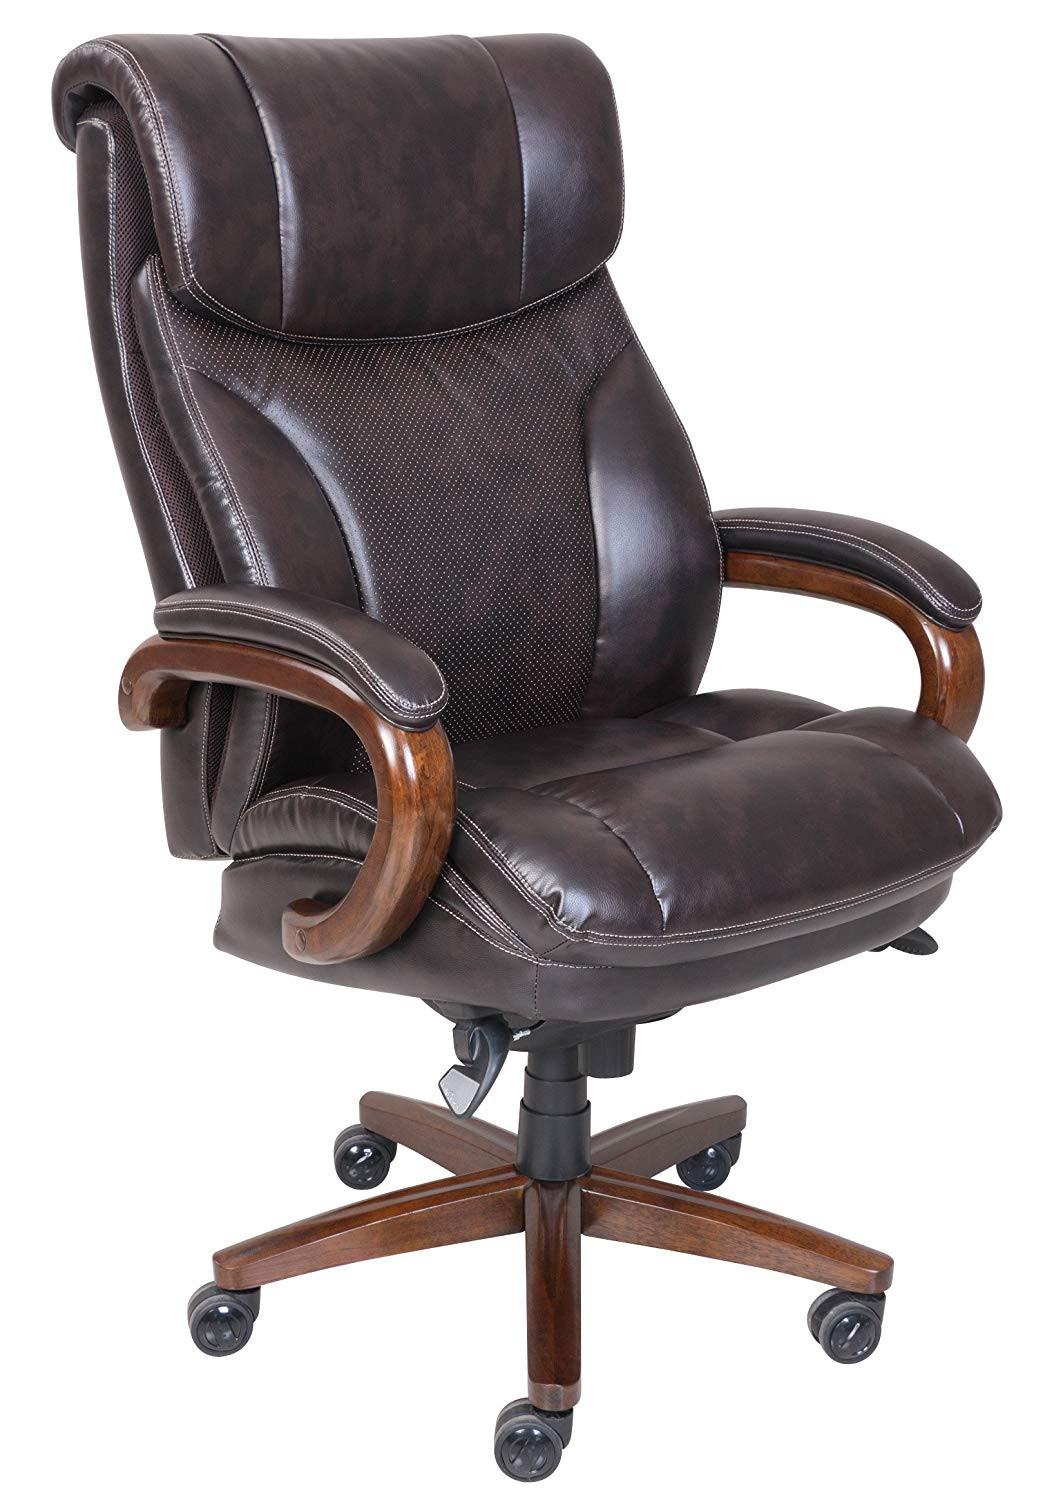 Best ideas about La-Z-Boy Office Chair
. Save or Pin 10 Most fortable La Z Boy fice Chairs & Alternatives Now.